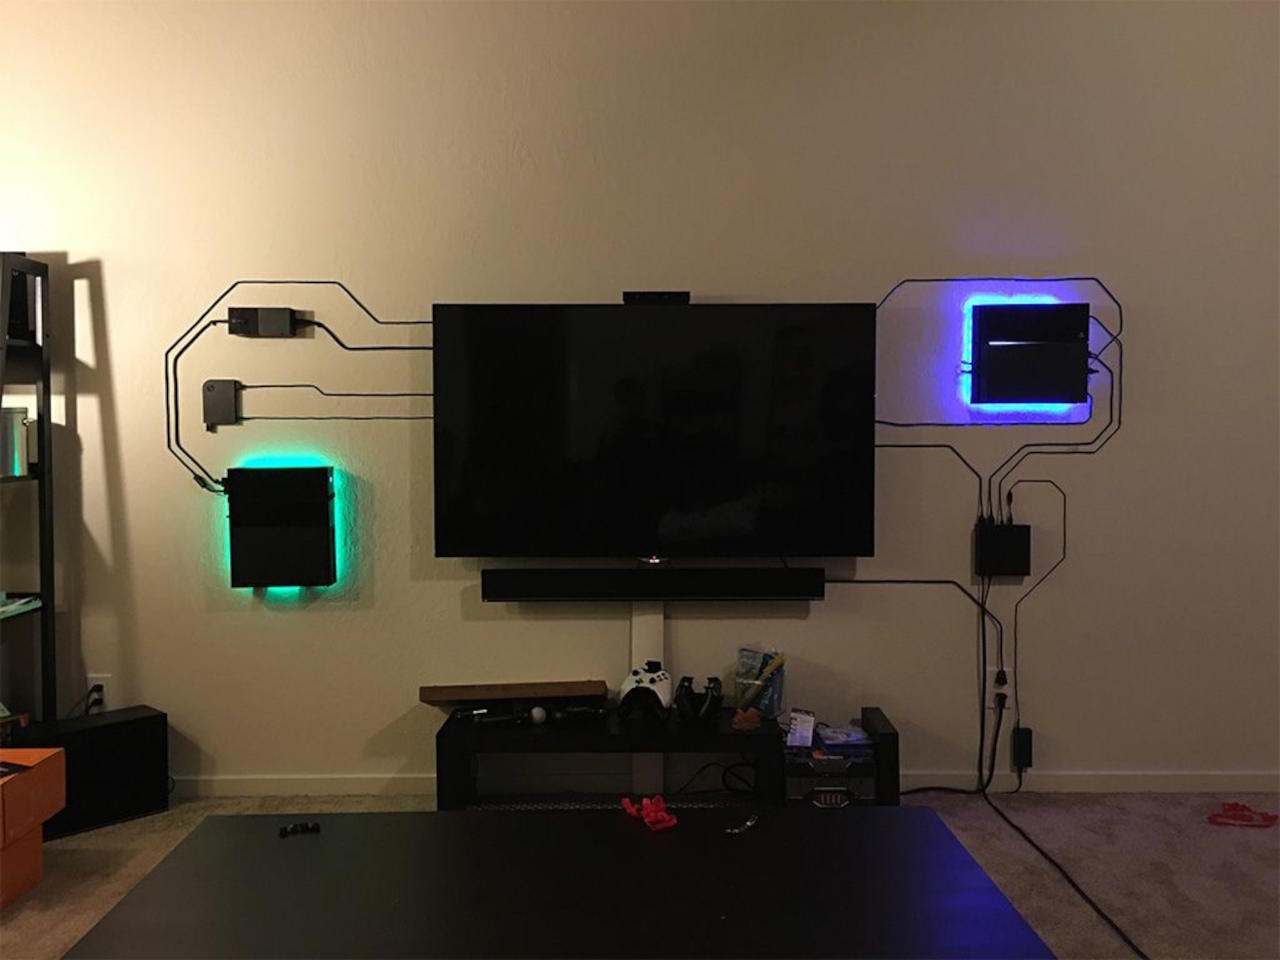 Home/Small Office Network - Creative Cabling